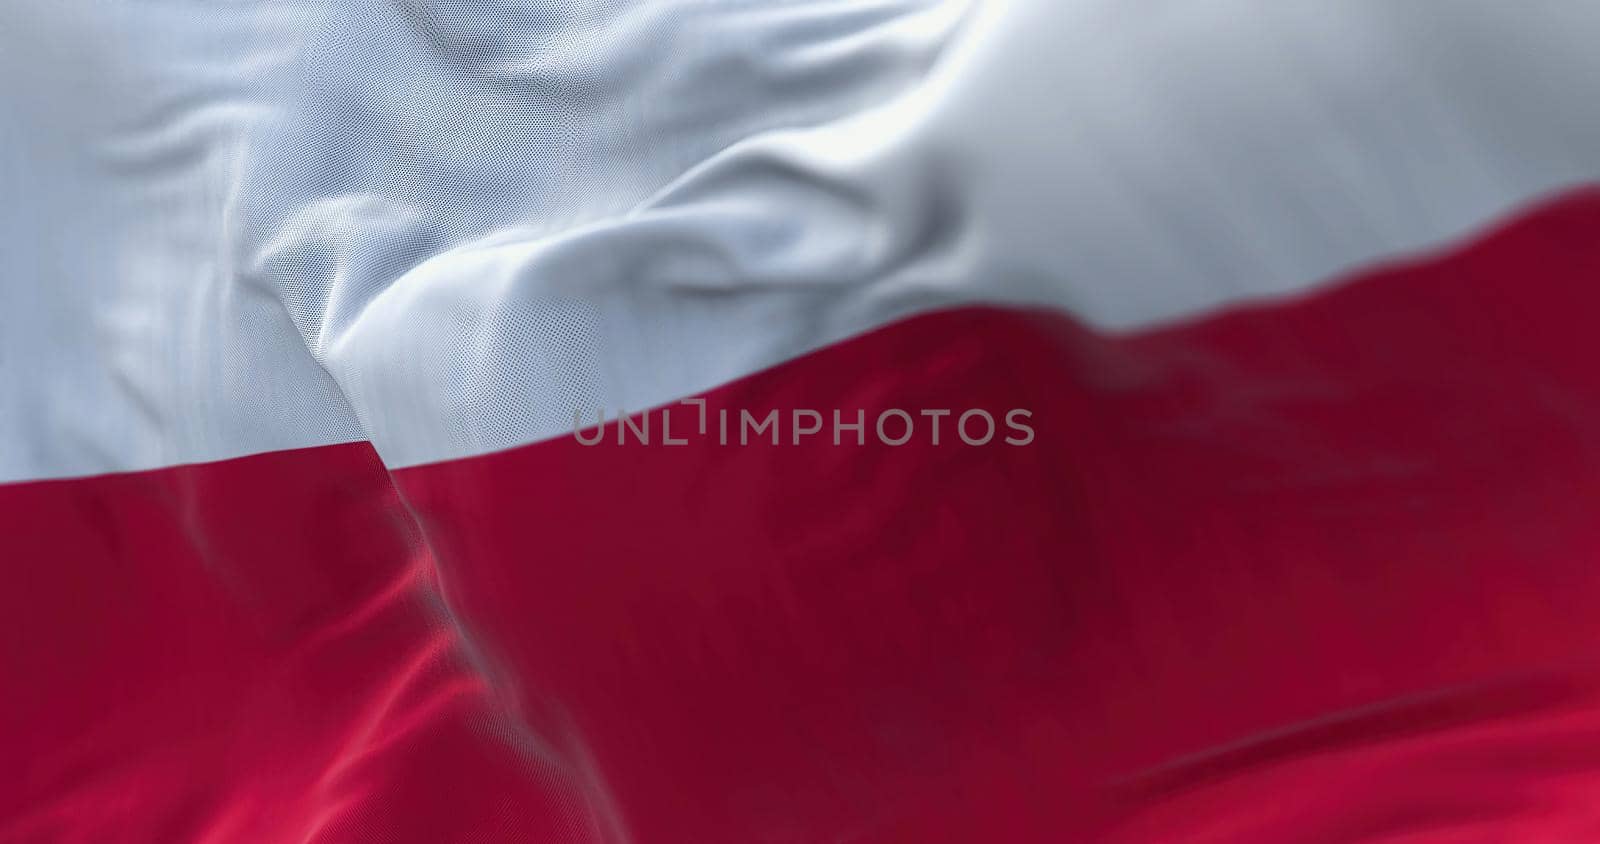 Close-up view of the Poland national flag waving in the wind. Poland is a country in Central Europe. Fabric textured background. Selective focus